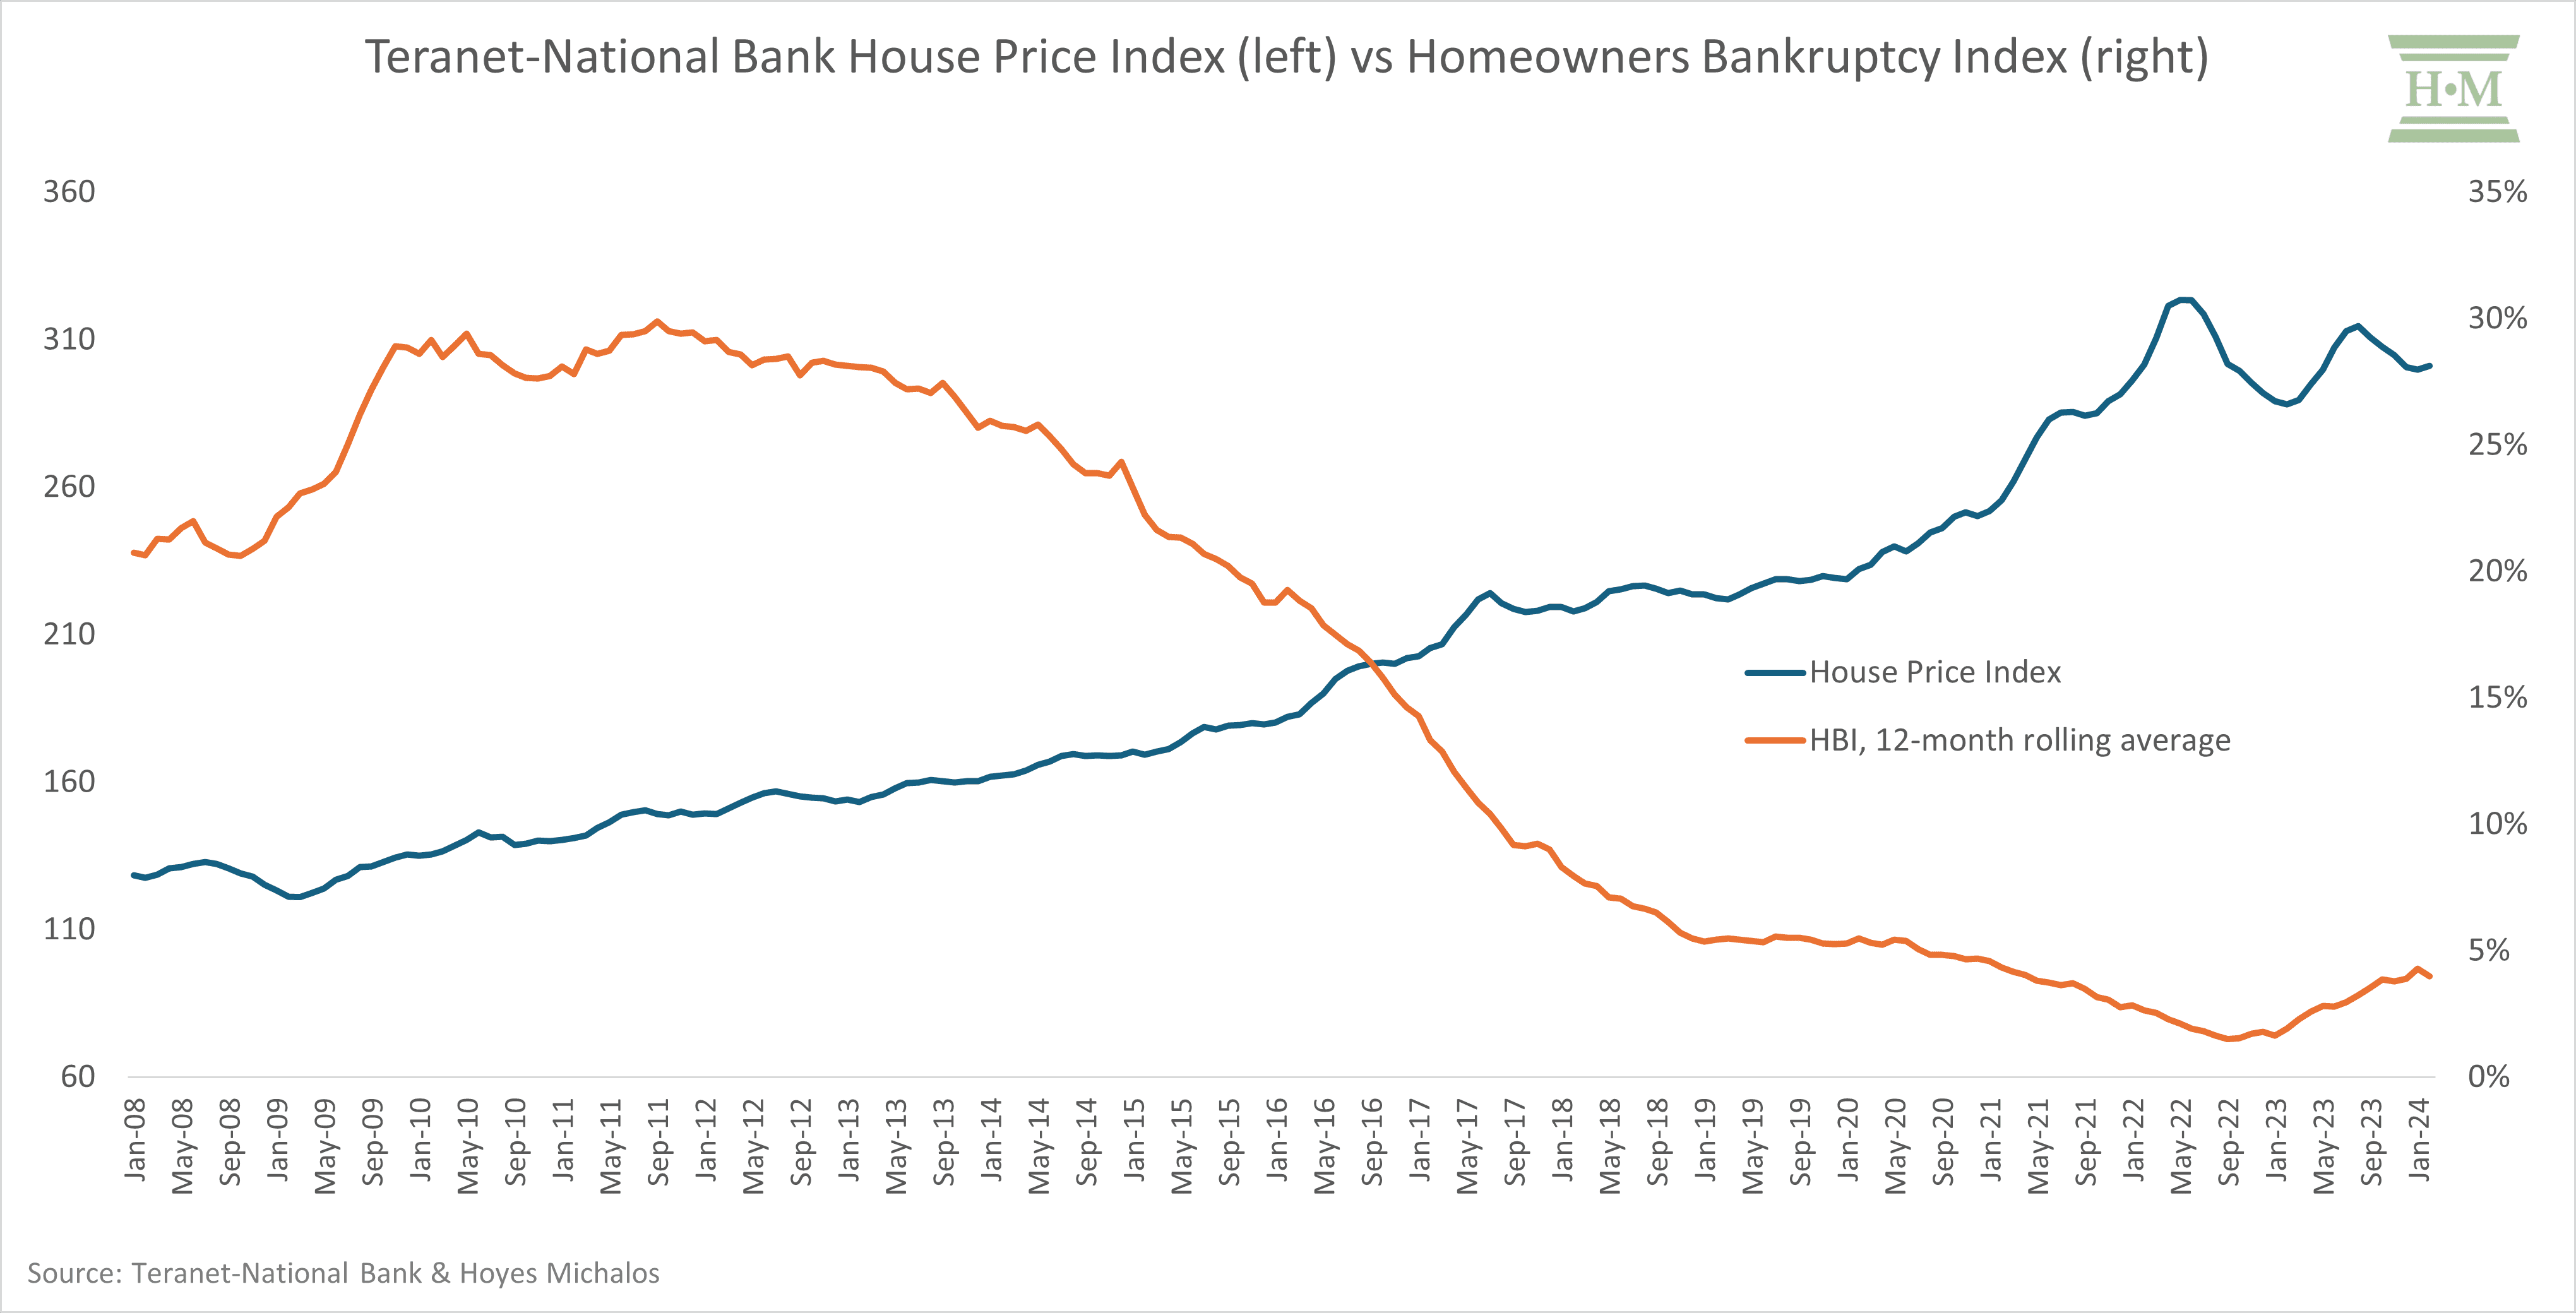 Teranet-National Bank House Price Index vs Homeowners Bankruptcy Index